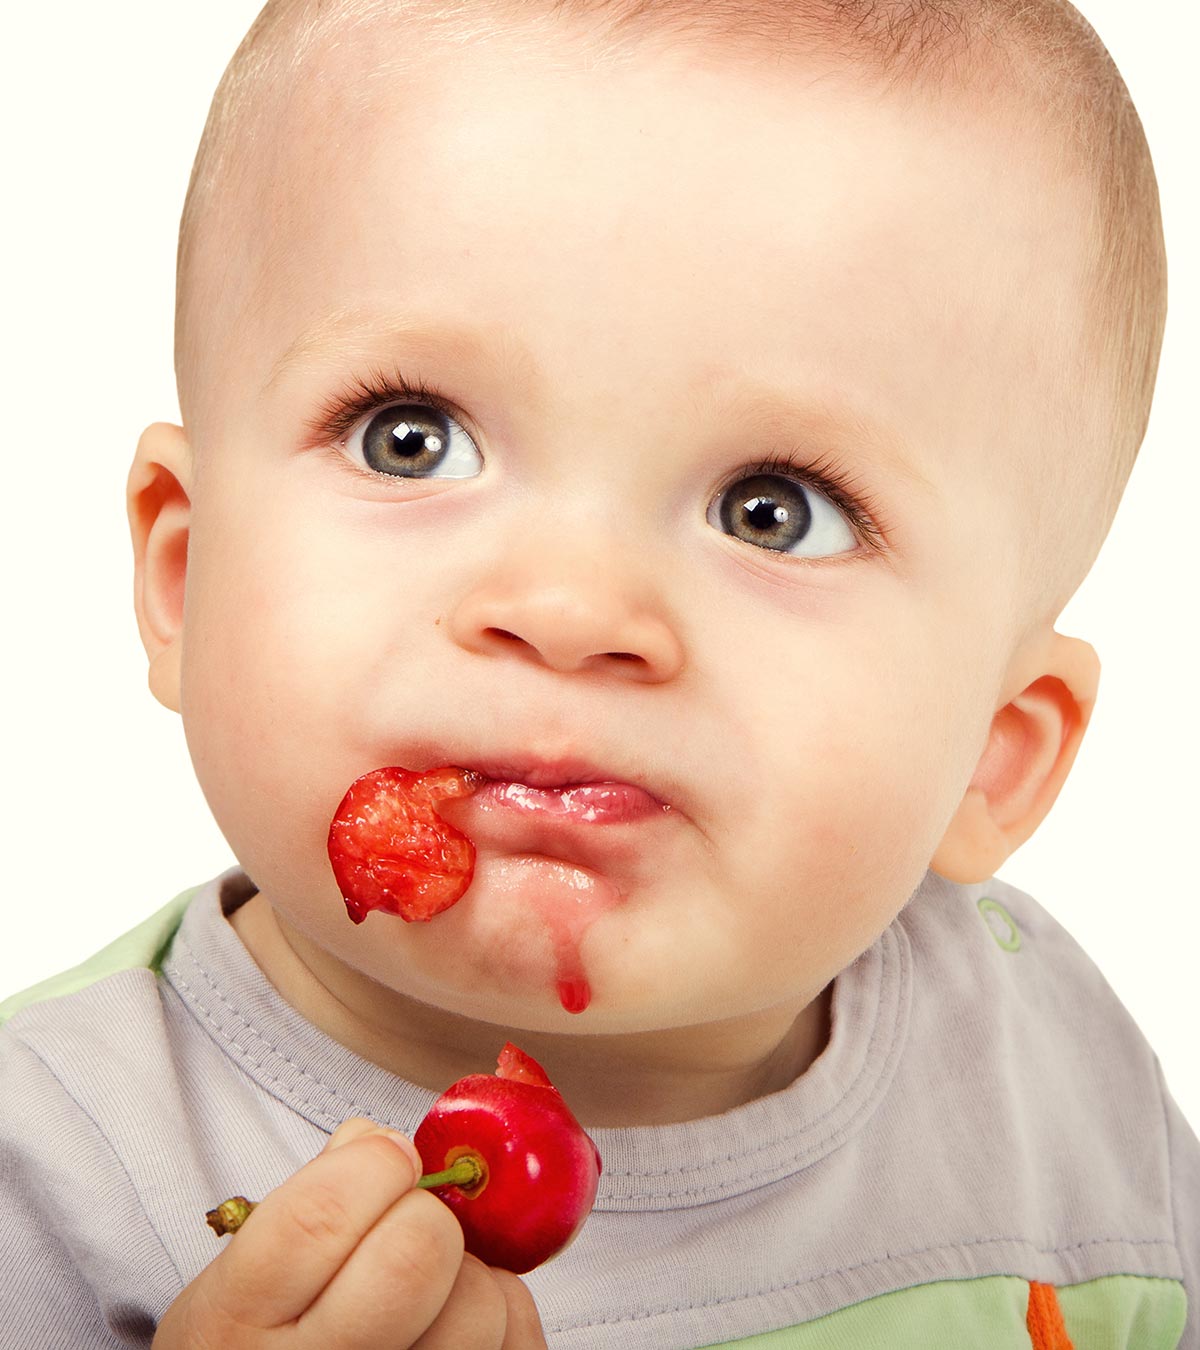 A baby eating cherry